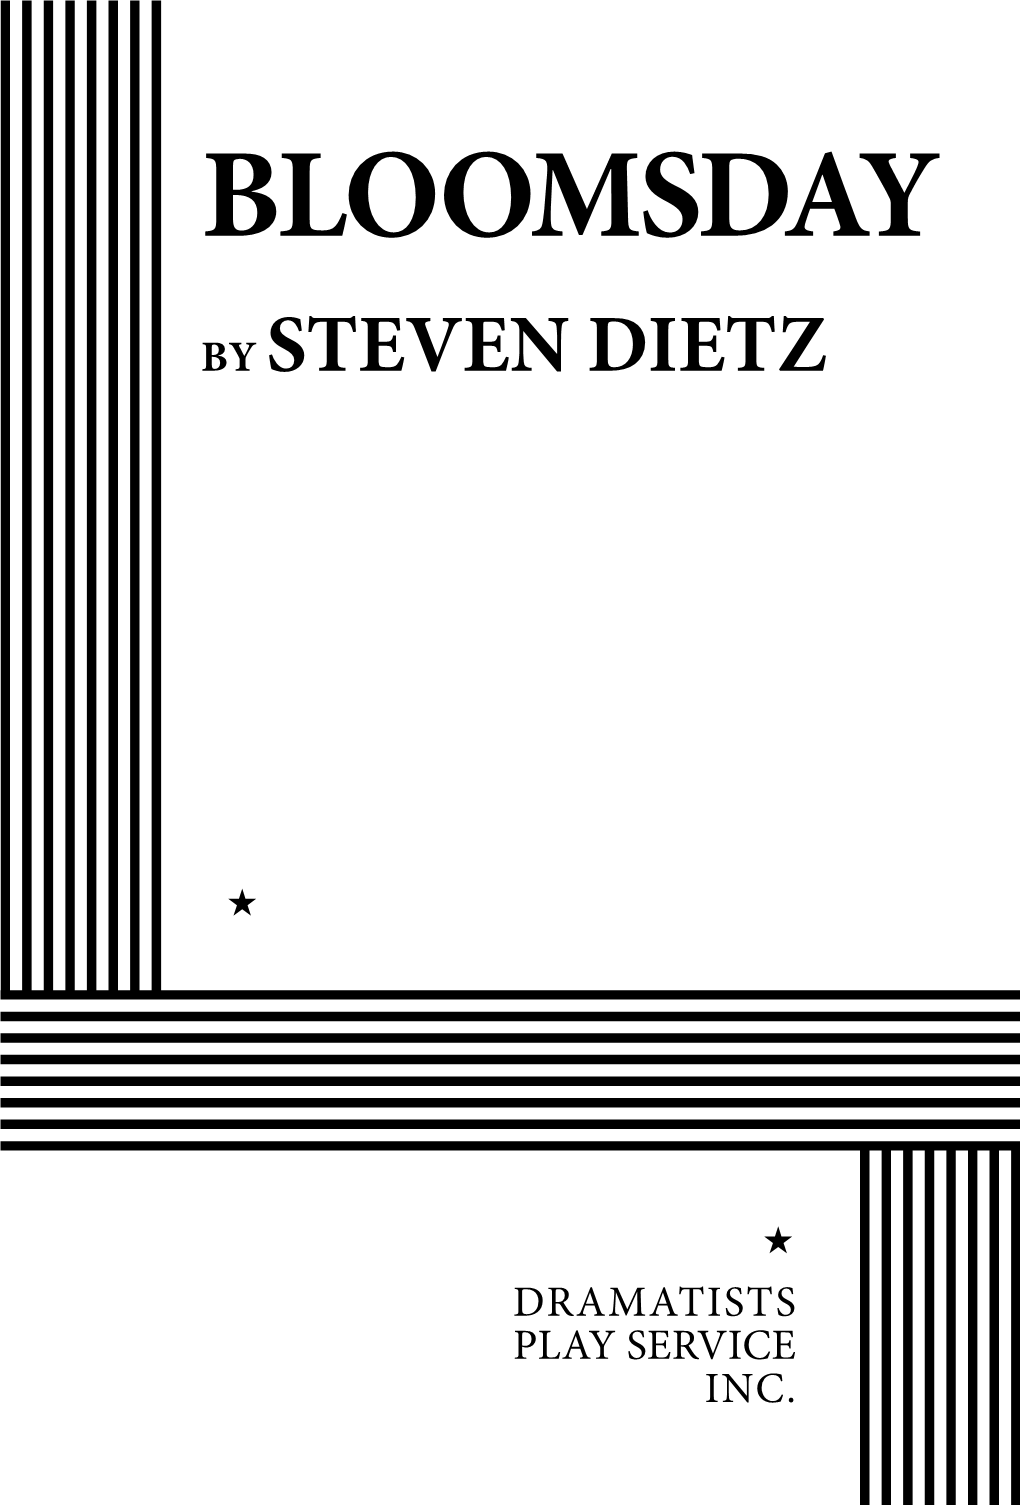 BLOOMSDAY by Steven Dietz “…To Her Time Is a Chord: Many Notes, Past-Present- Future, All Real…All Alive…And All Played at Once.”